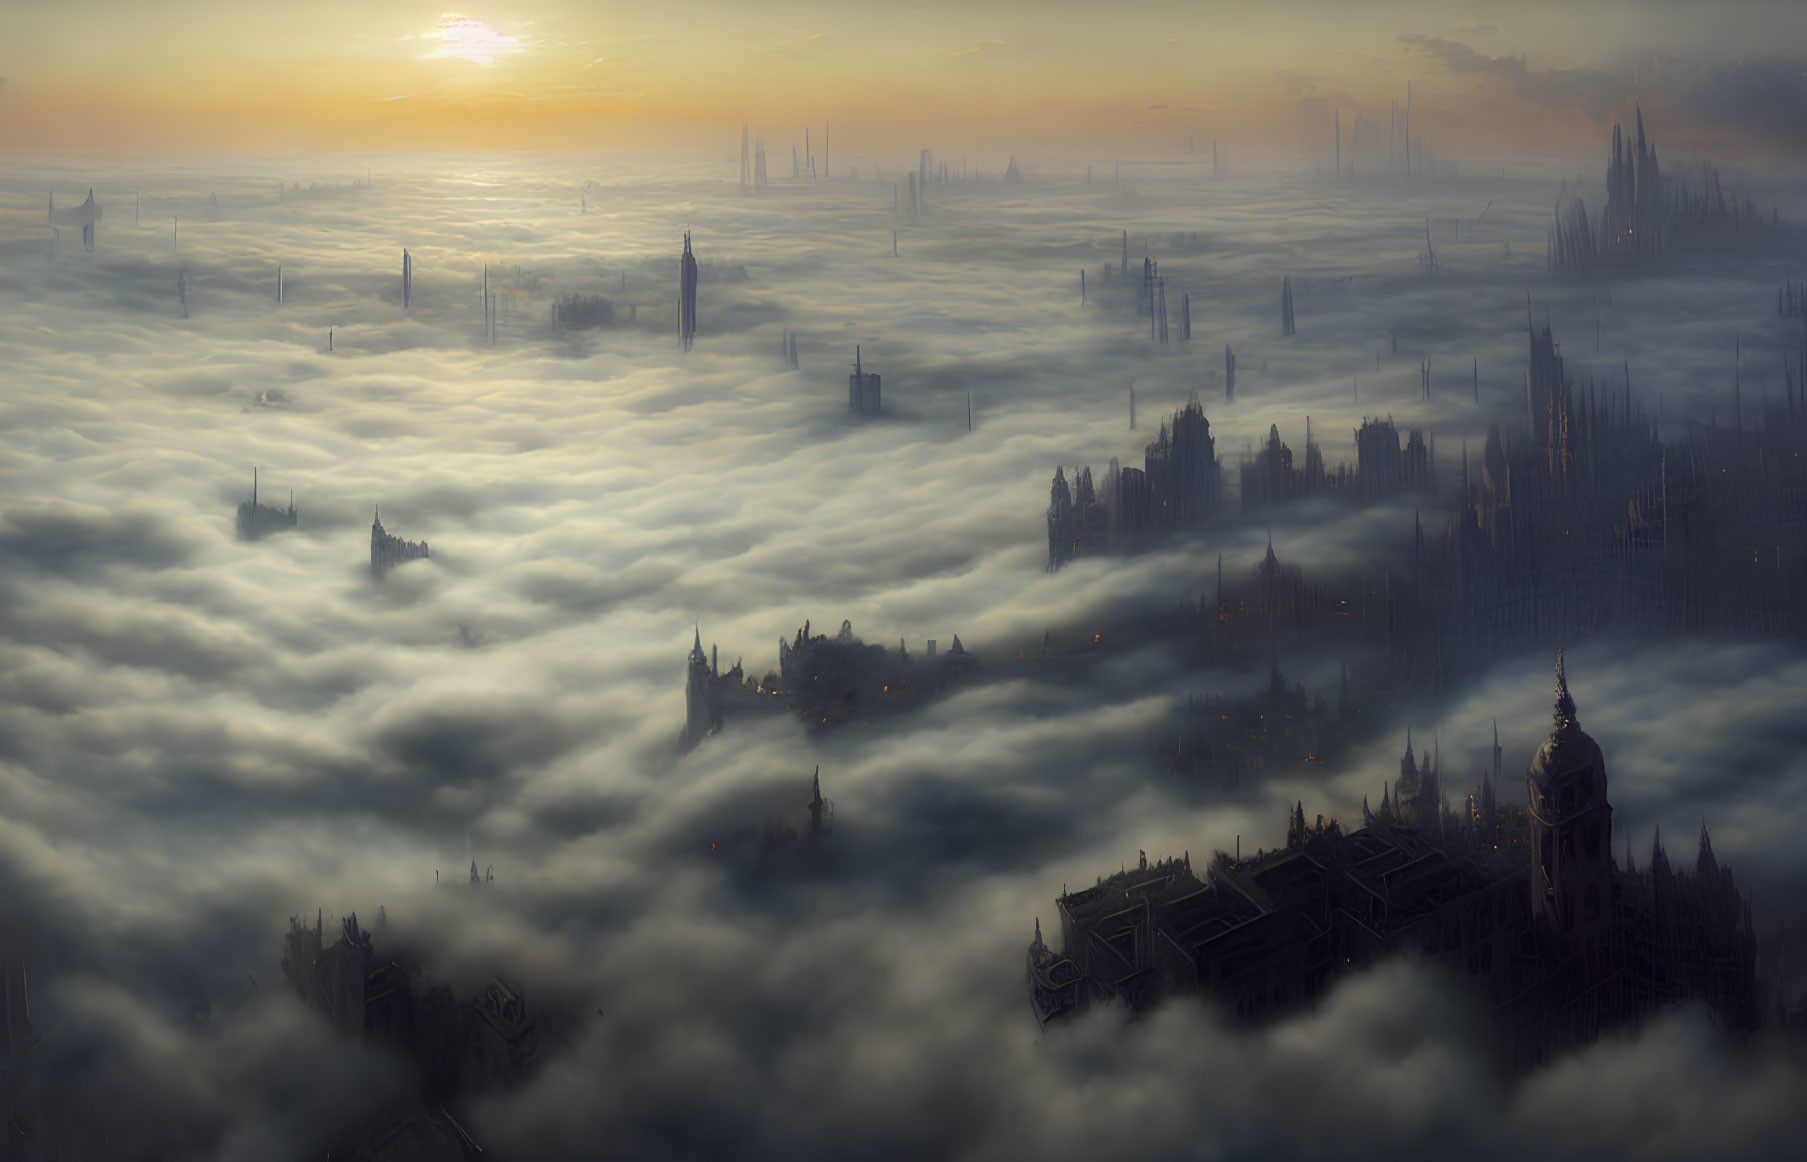 Fantastical cityscape with spires and towers in golden light